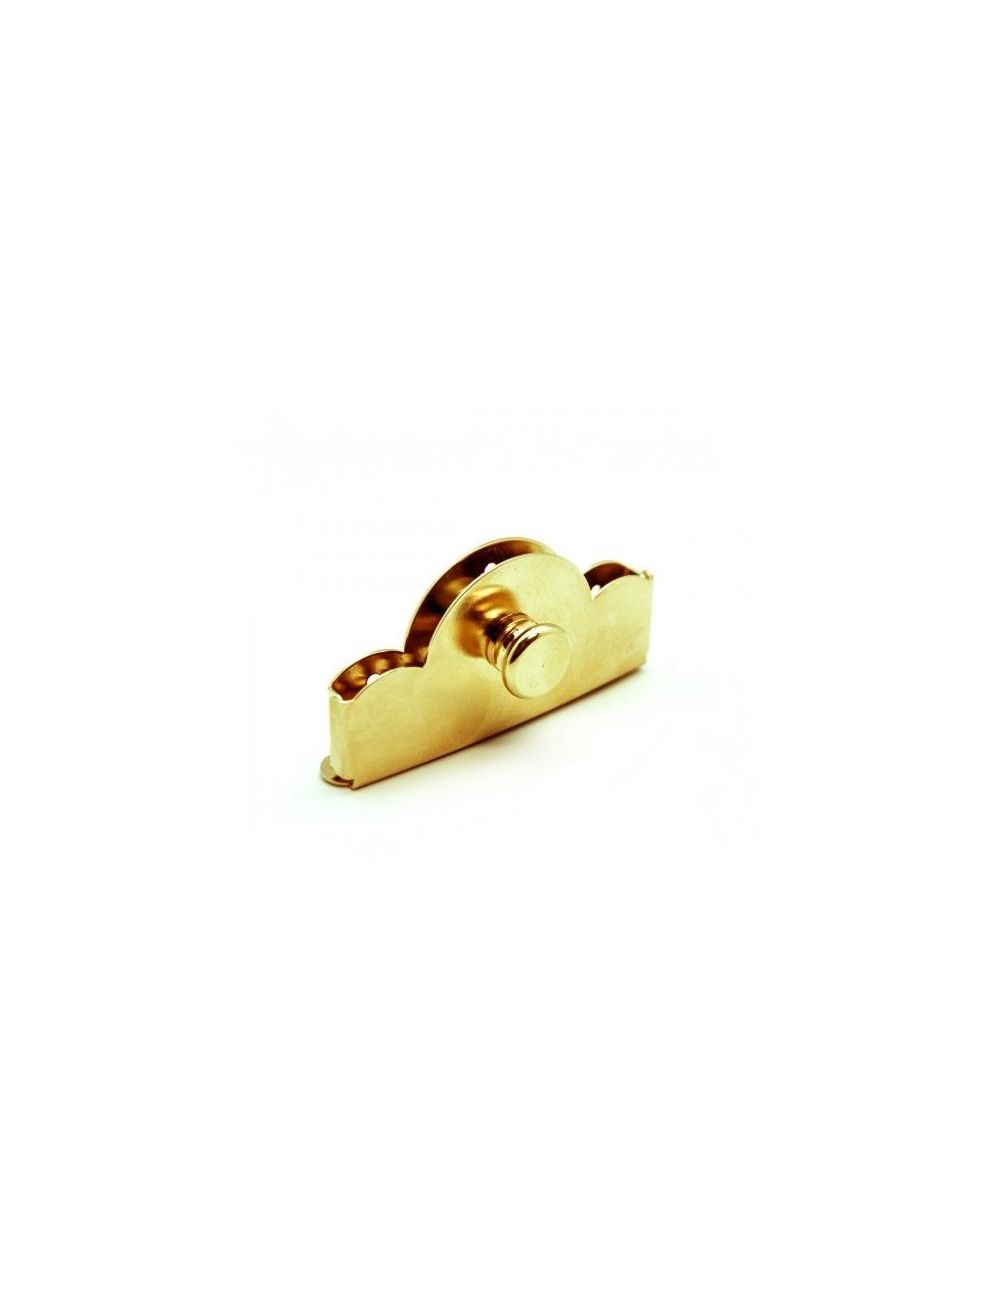 Tailpiece for Bandurria and Laud Alhambra 9506 9506 Spare parts